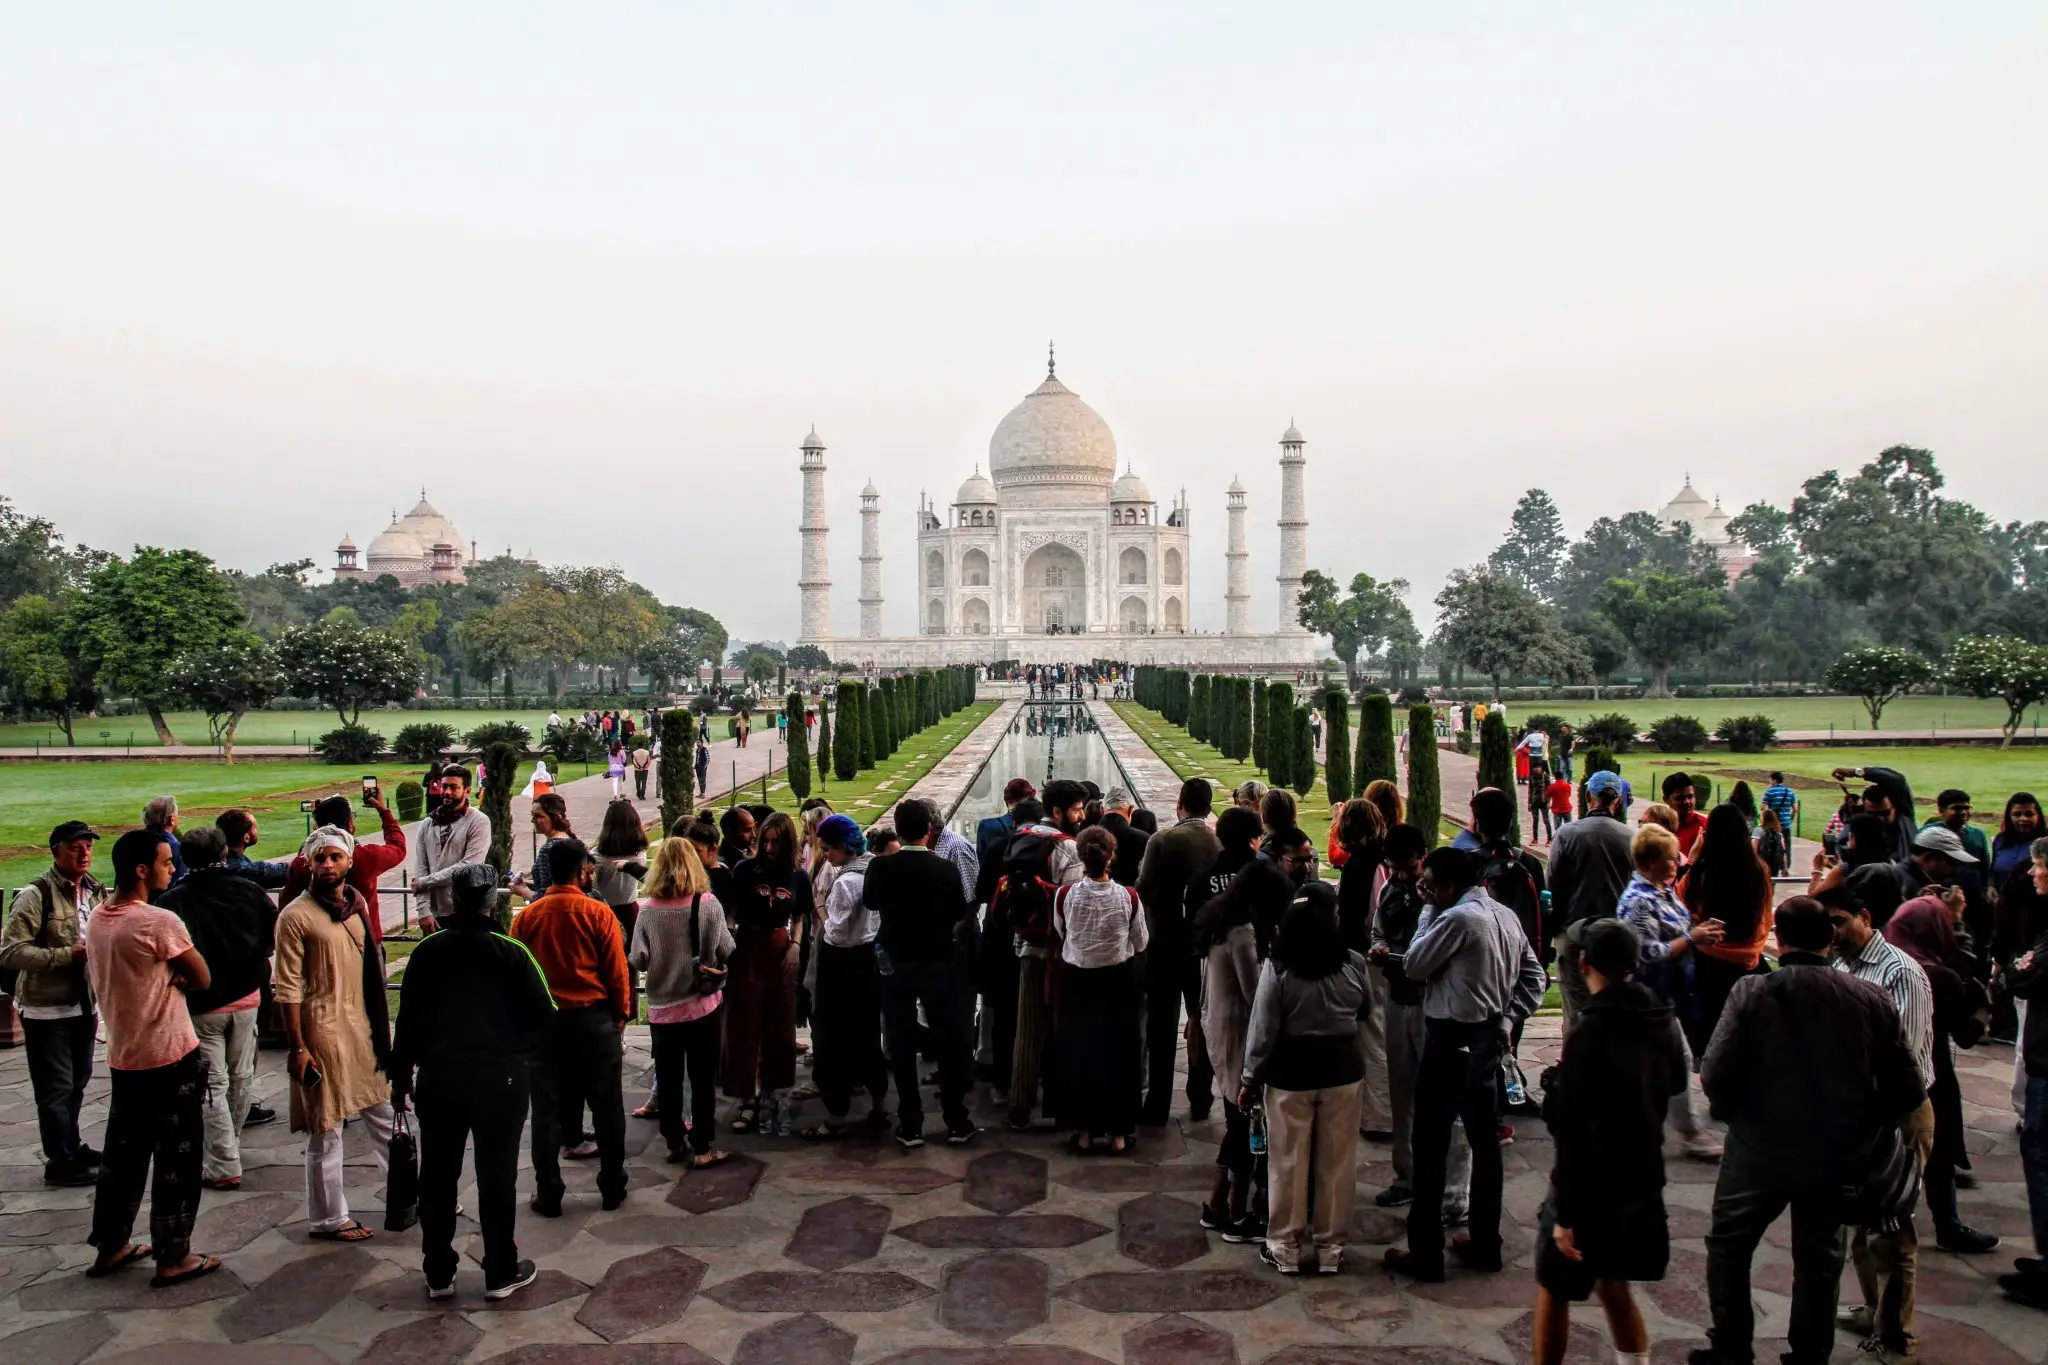 Crowds in front of the Taj Mahal, Agra